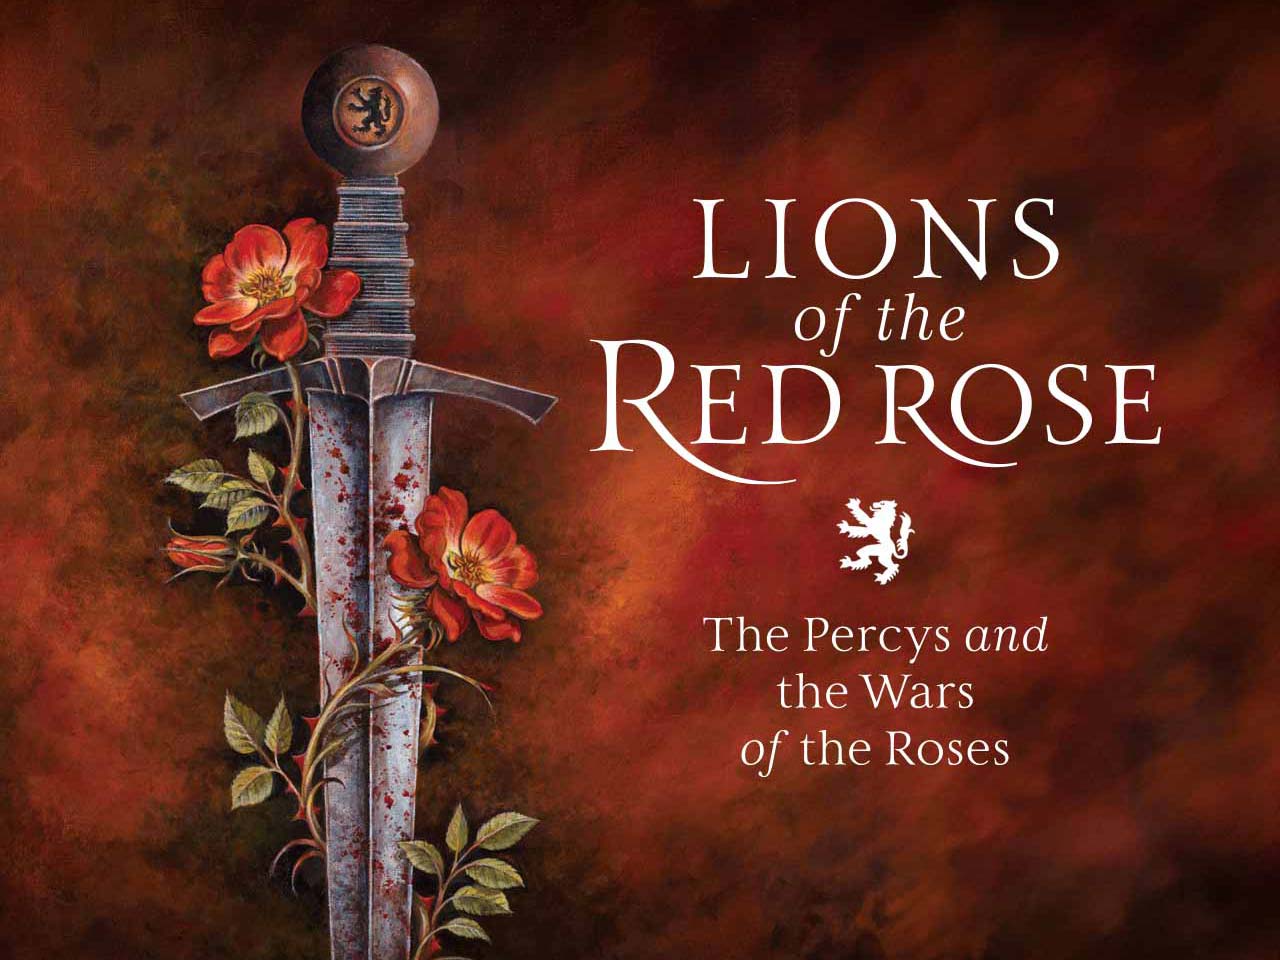 Lions of the Red Rose